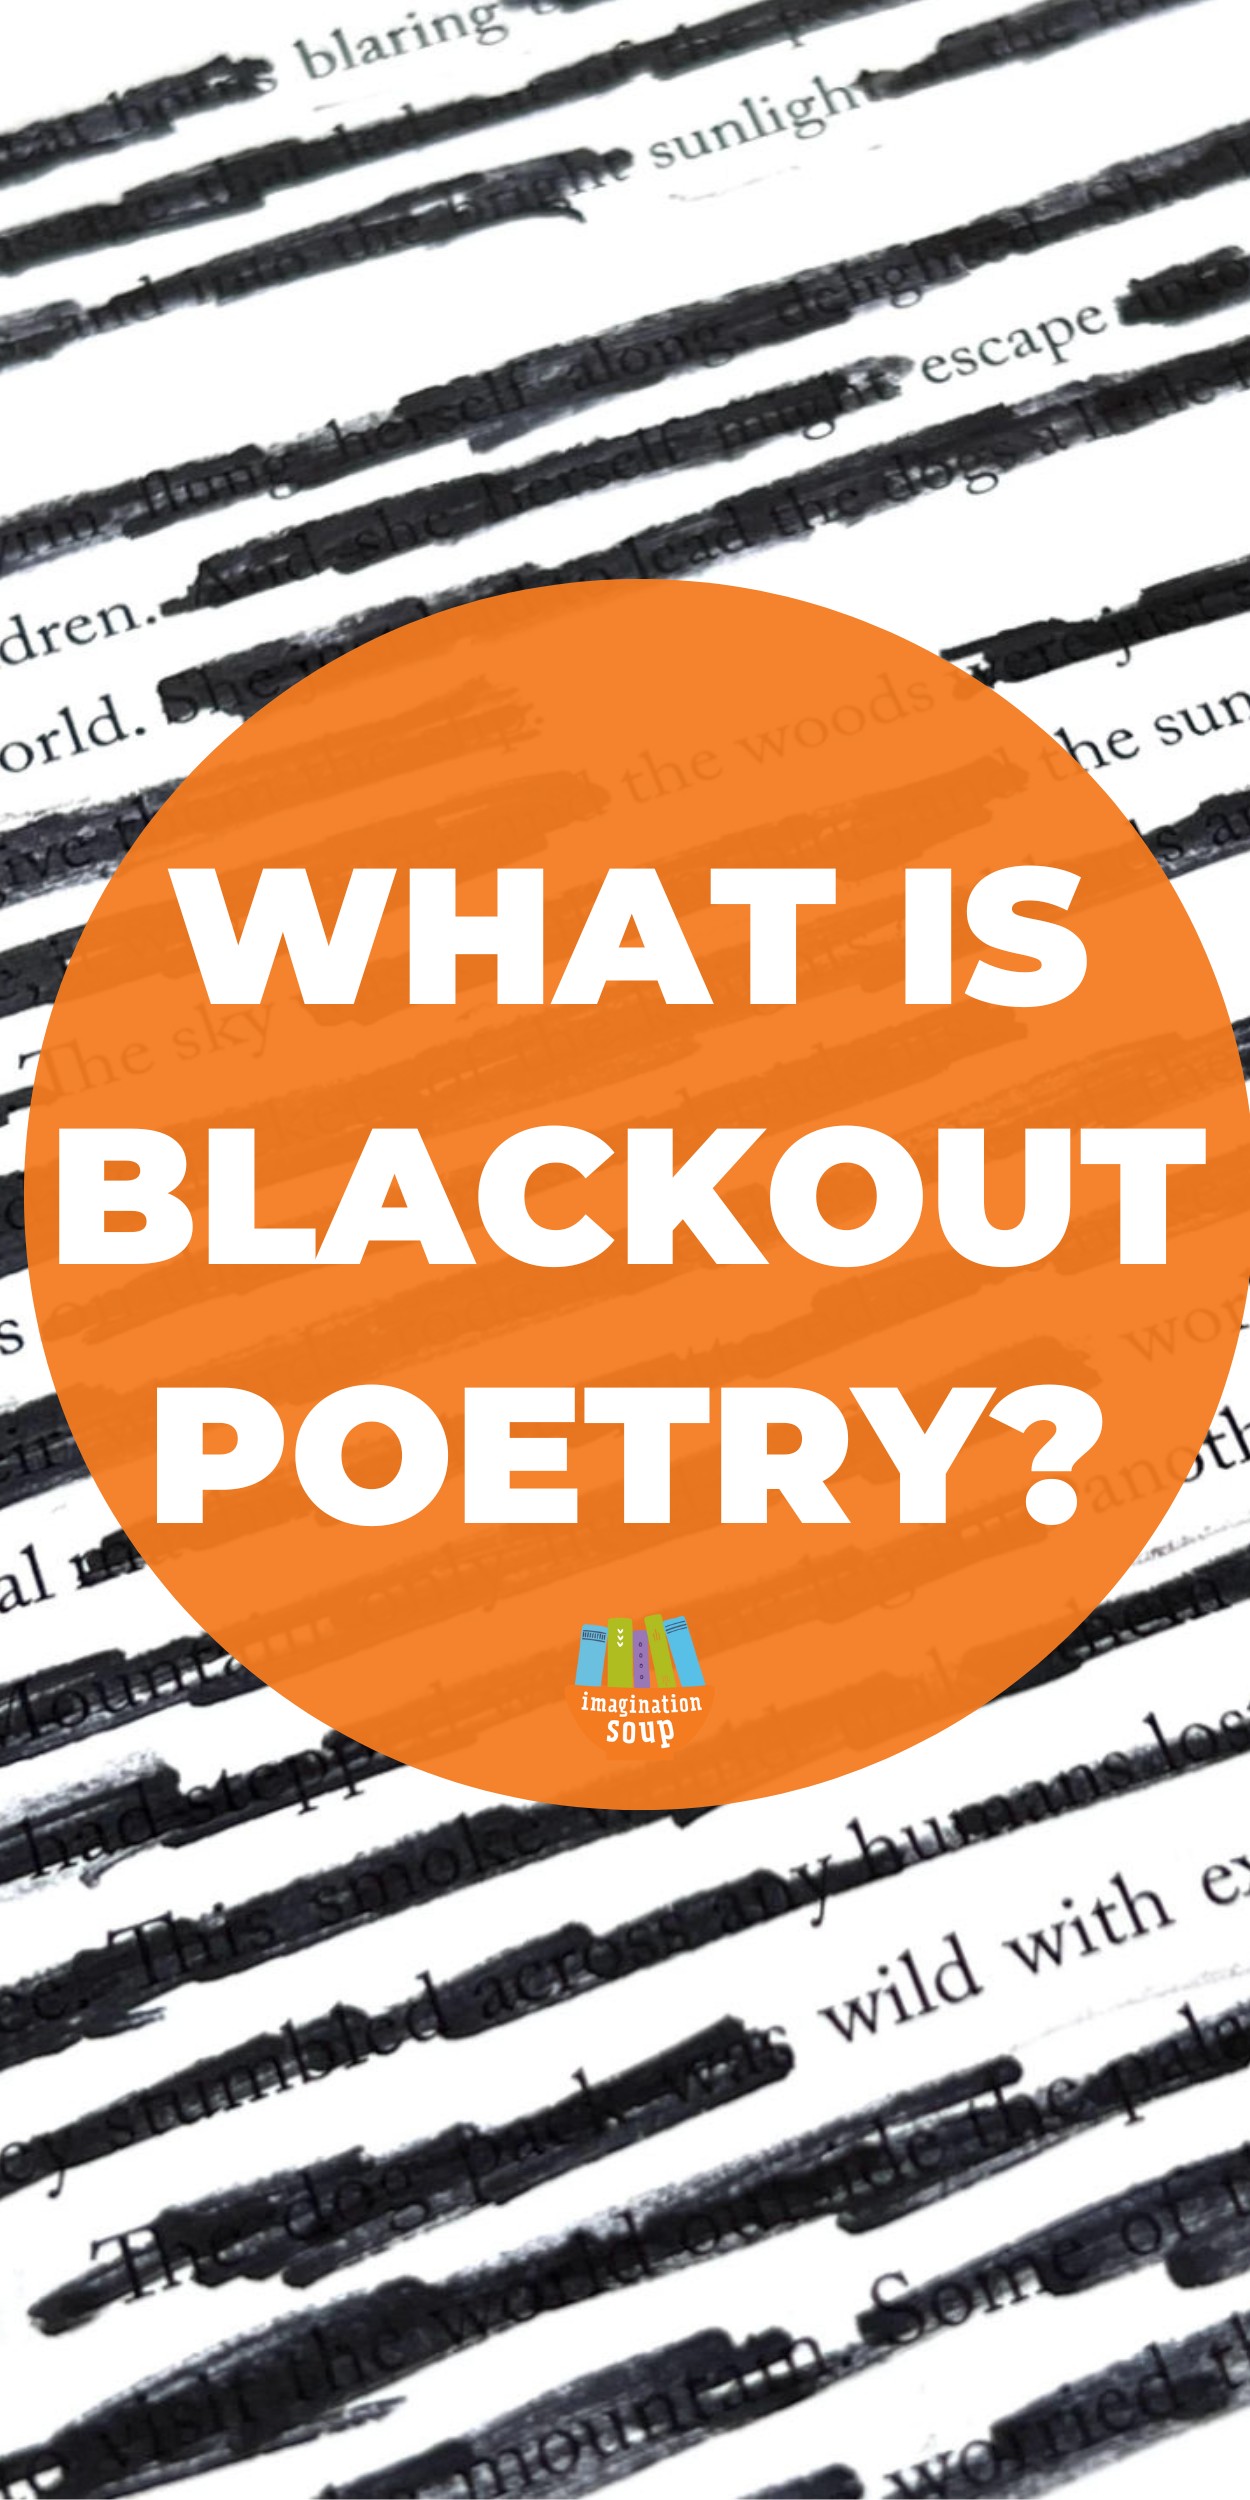 Celebrate Poetry Month, or any time, by creating blackout poetry, poetry you write by taking previously written text and blacking out words and phrases so the word or phrase left create a new, original poem.